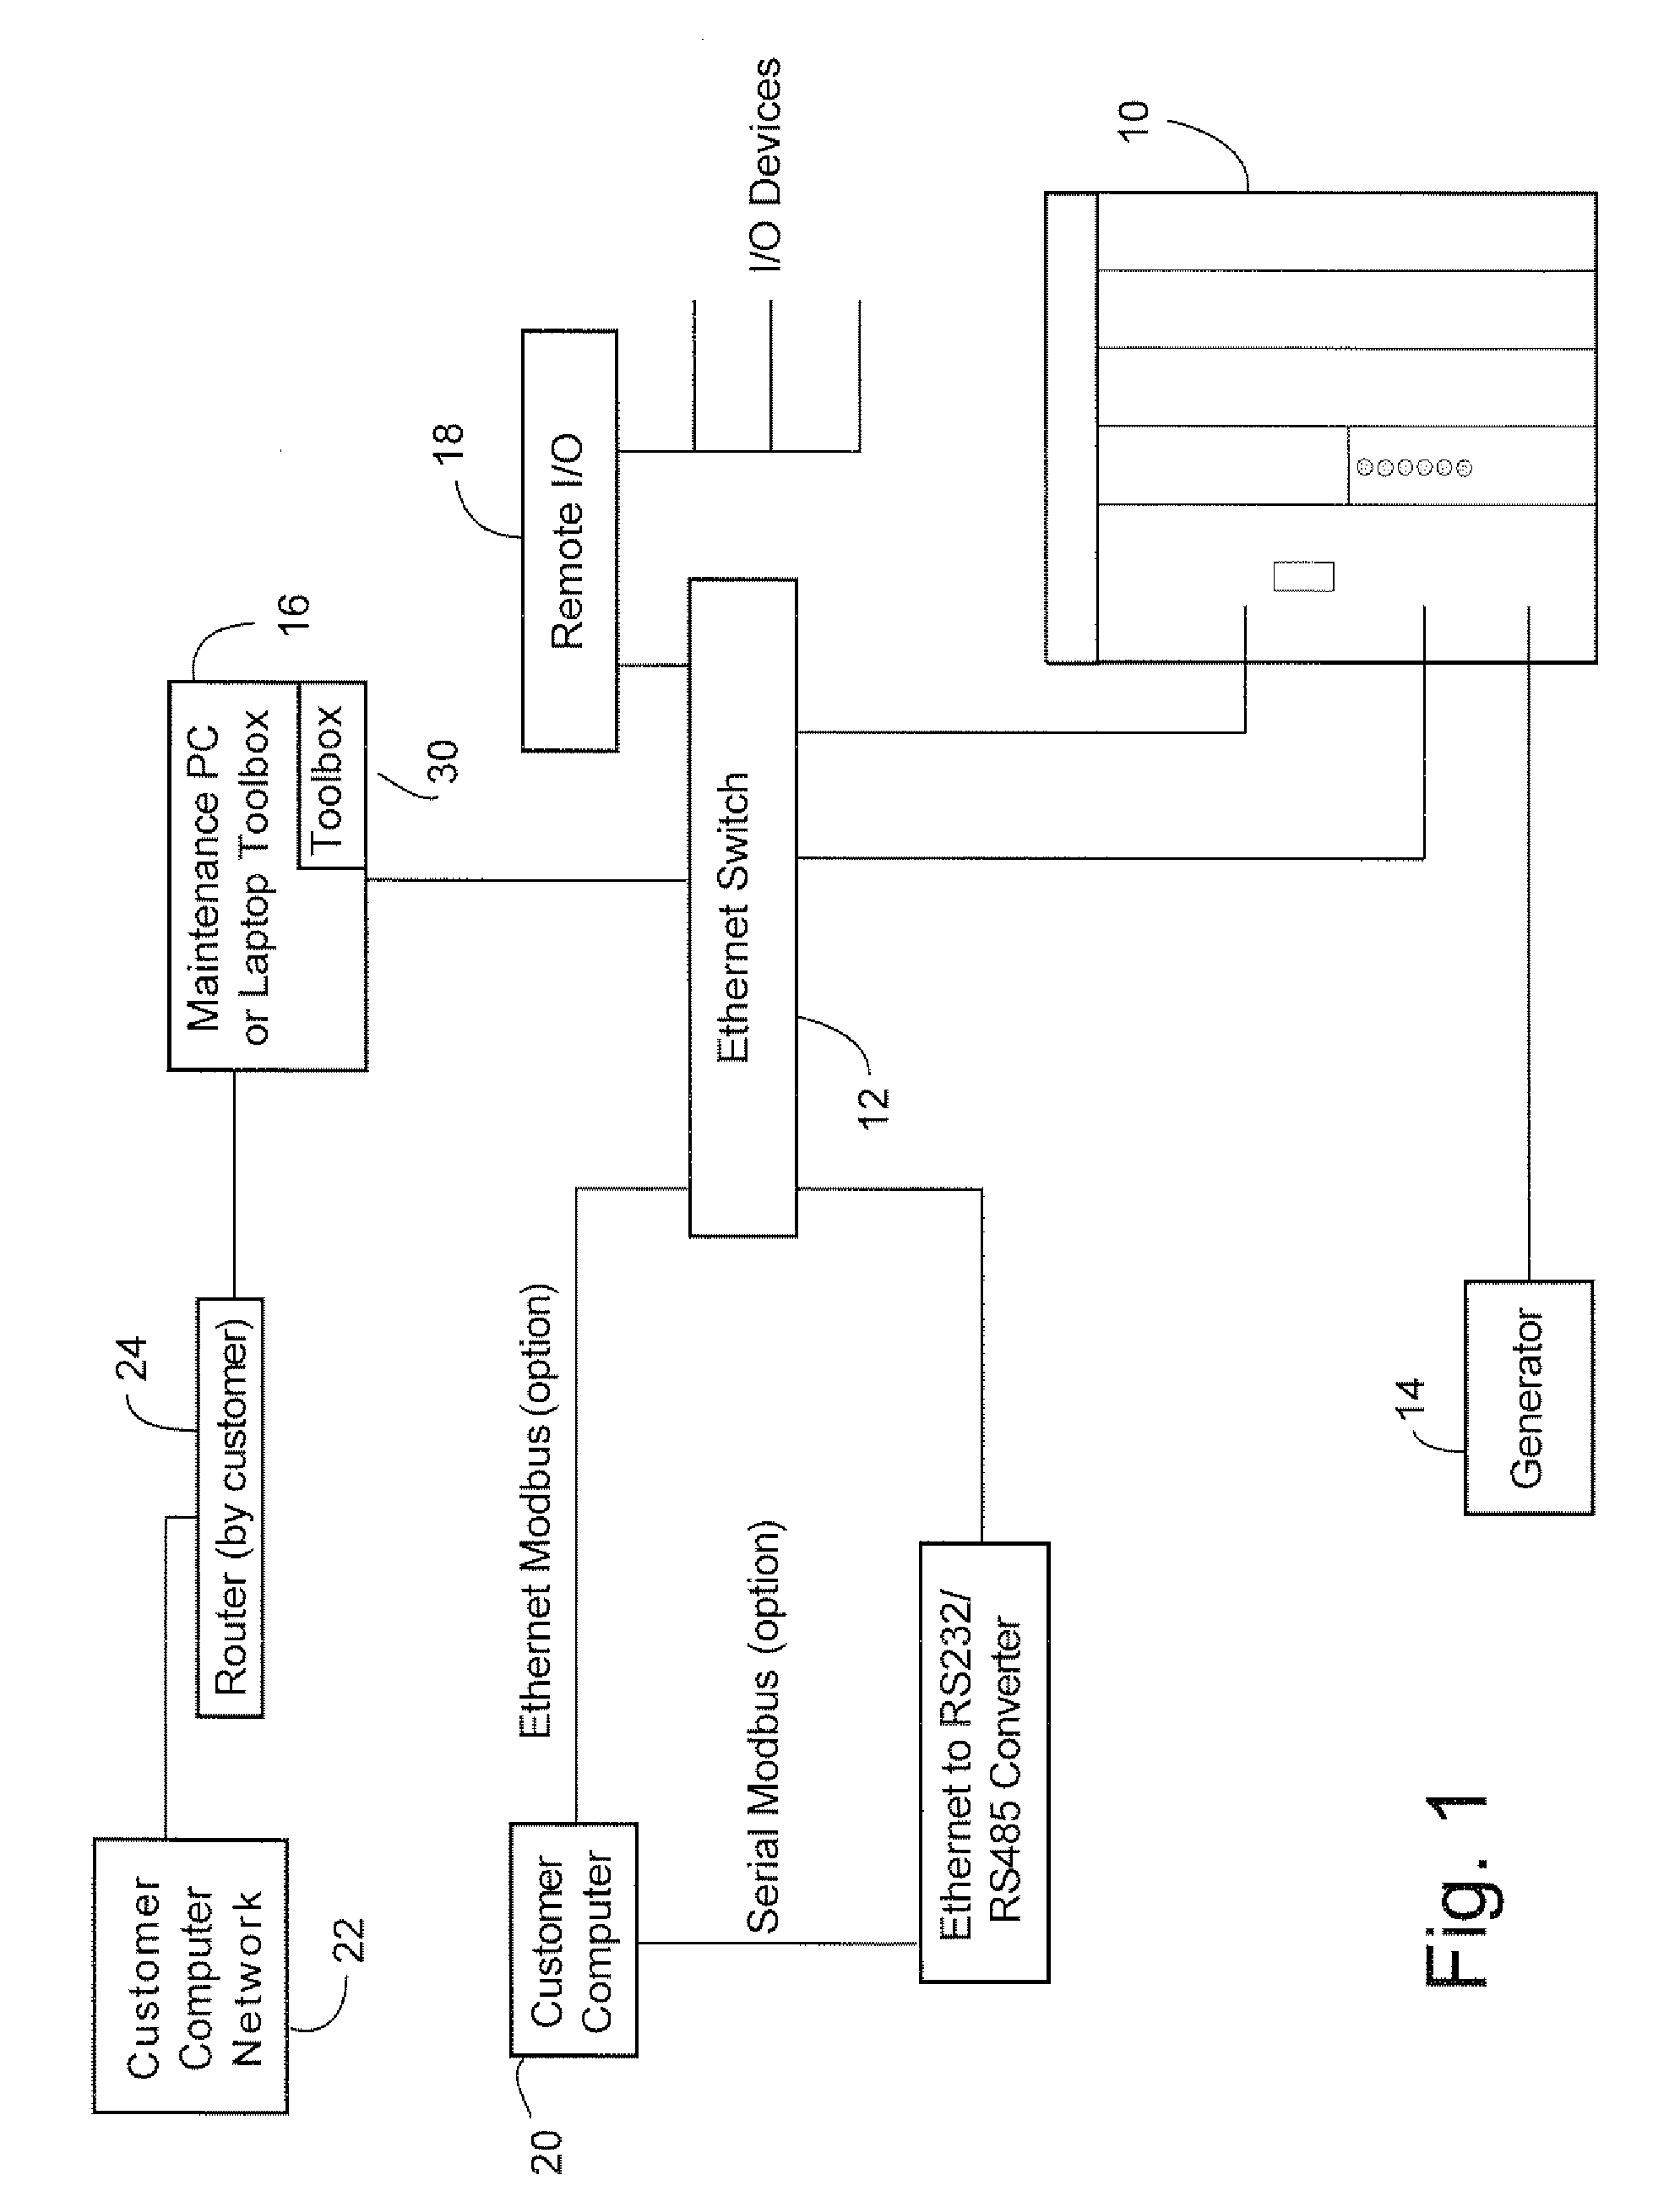 Method and system for rapid modeling and verification of excitation systems for synchronous generators